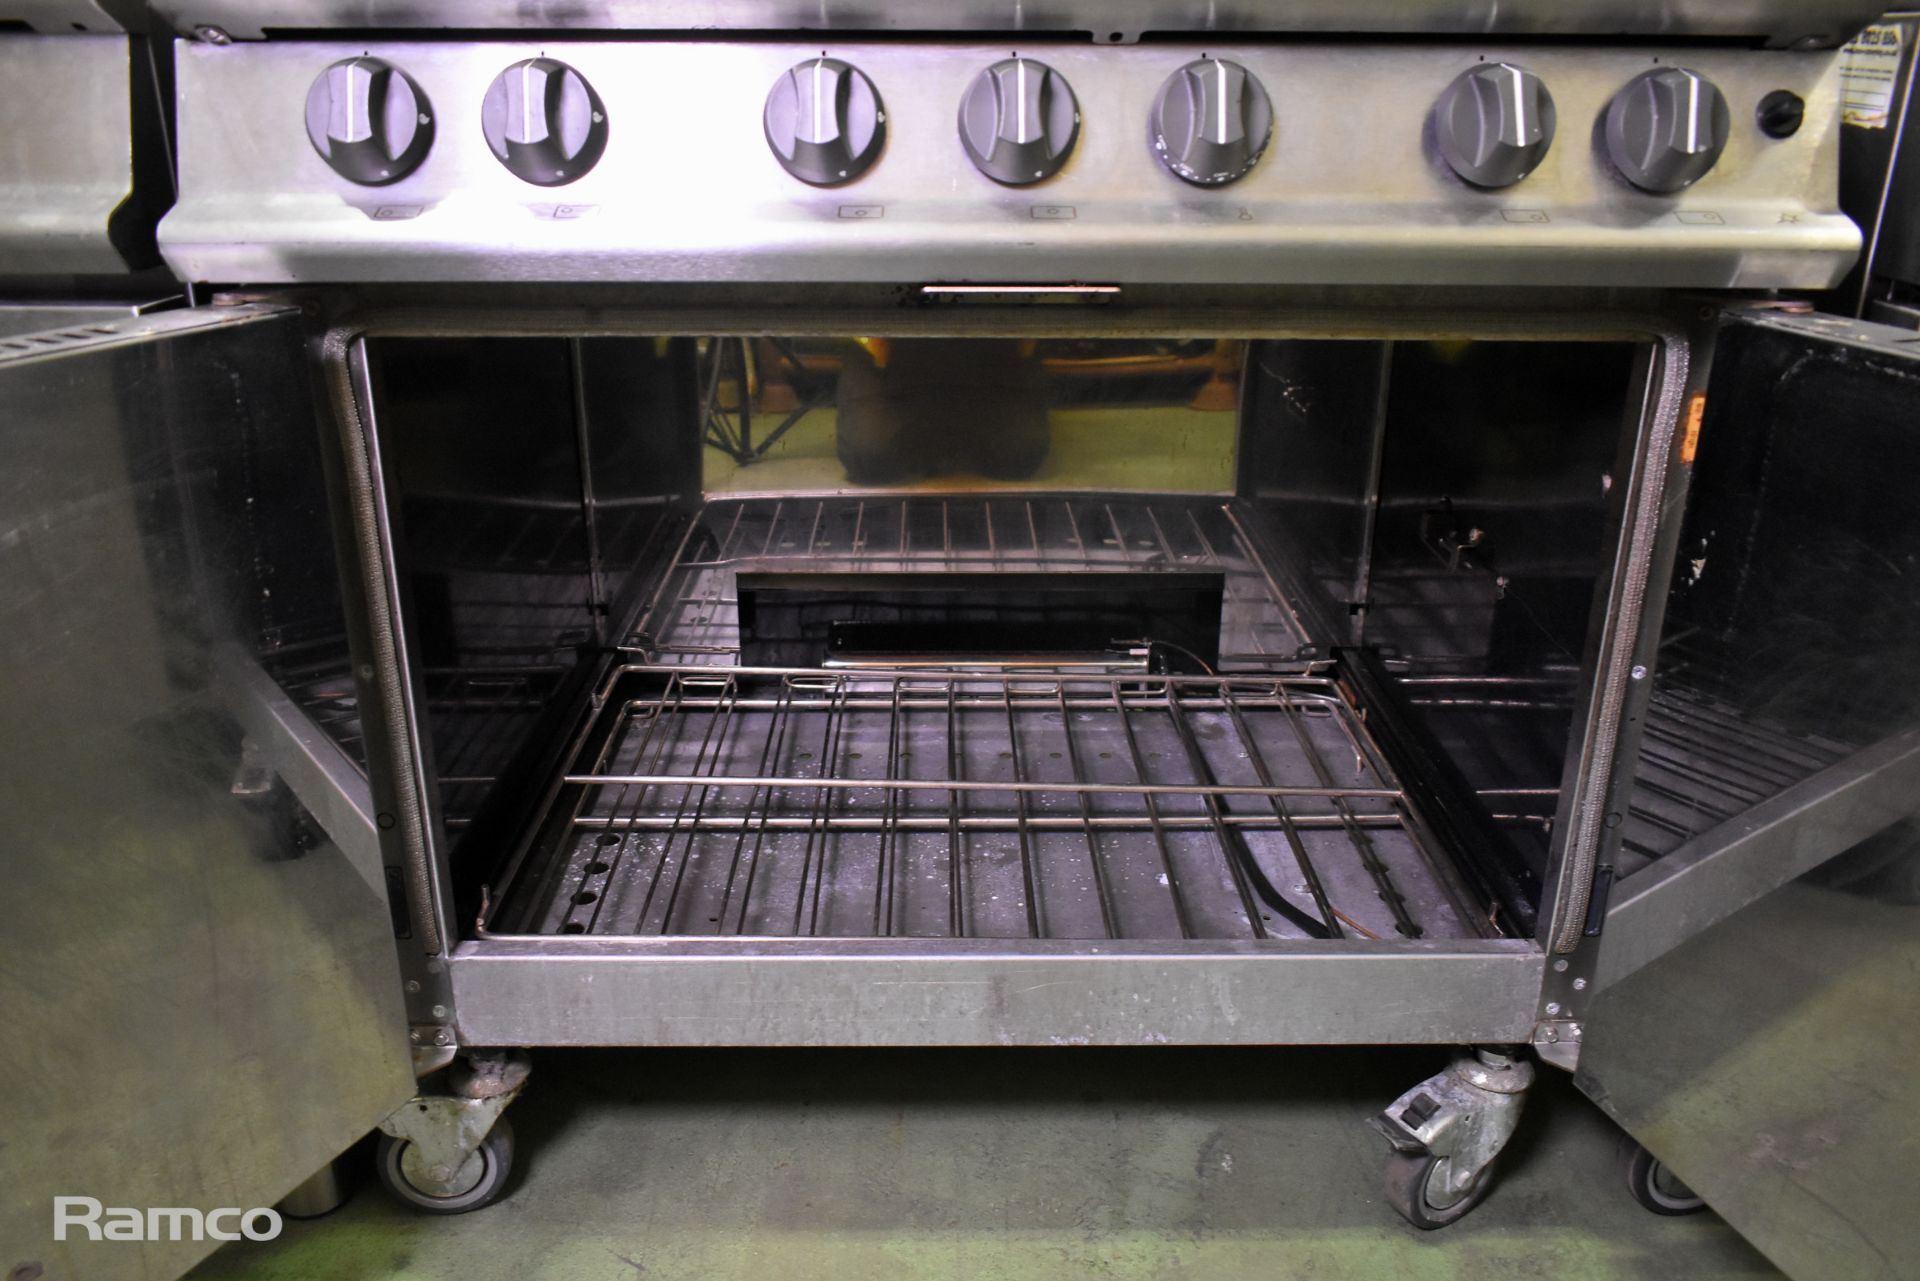 Falcon G2101 OT stainless steel gas six burner plus oven range - W 900 x D 900 x H 940mm - Image 6 of 7